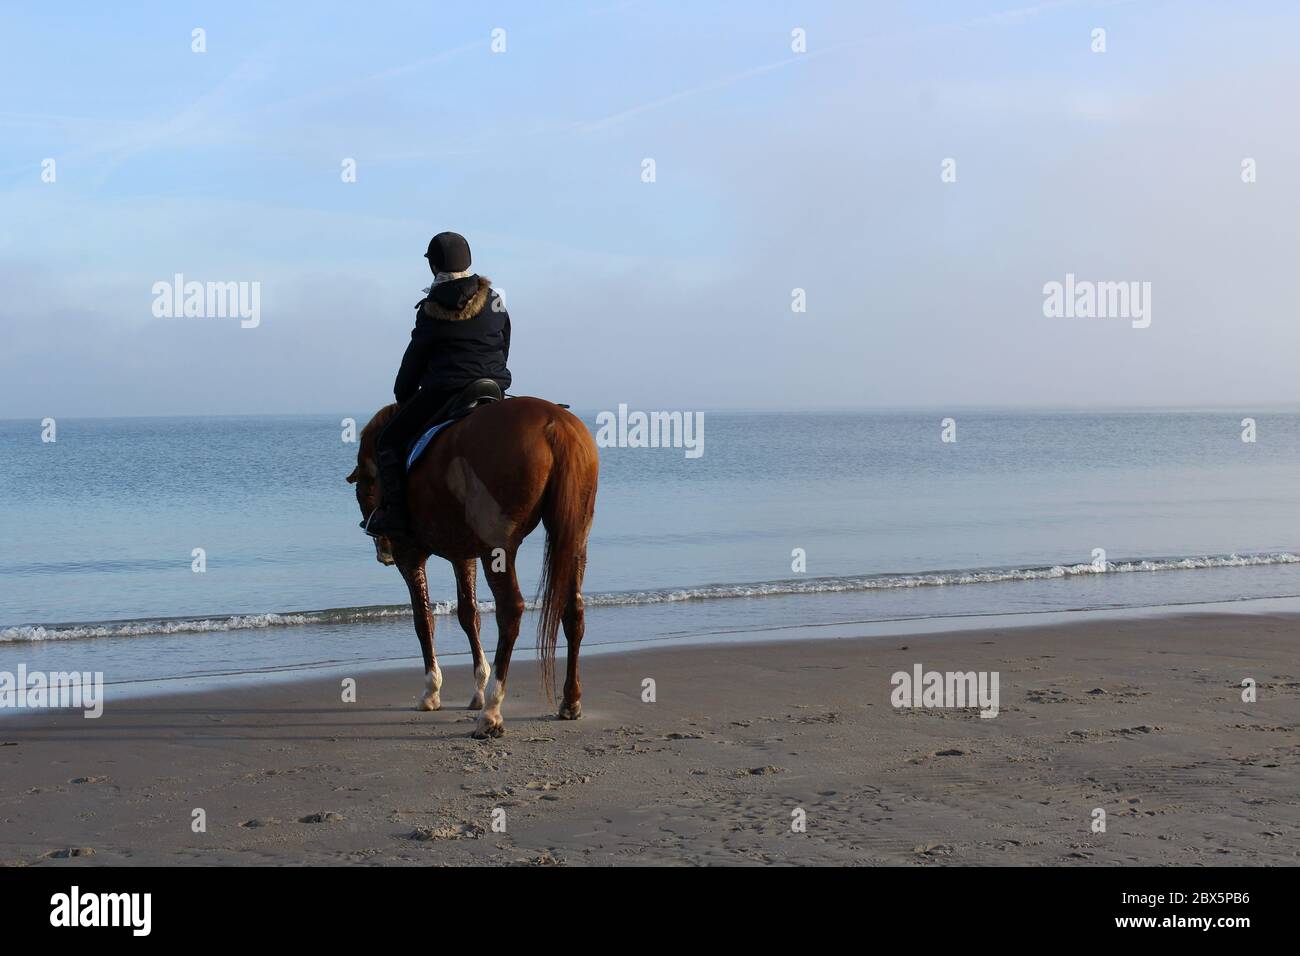 Solitary rider on horse looking out to the sea on Scharbeutz beach in the morning. Stock Photo